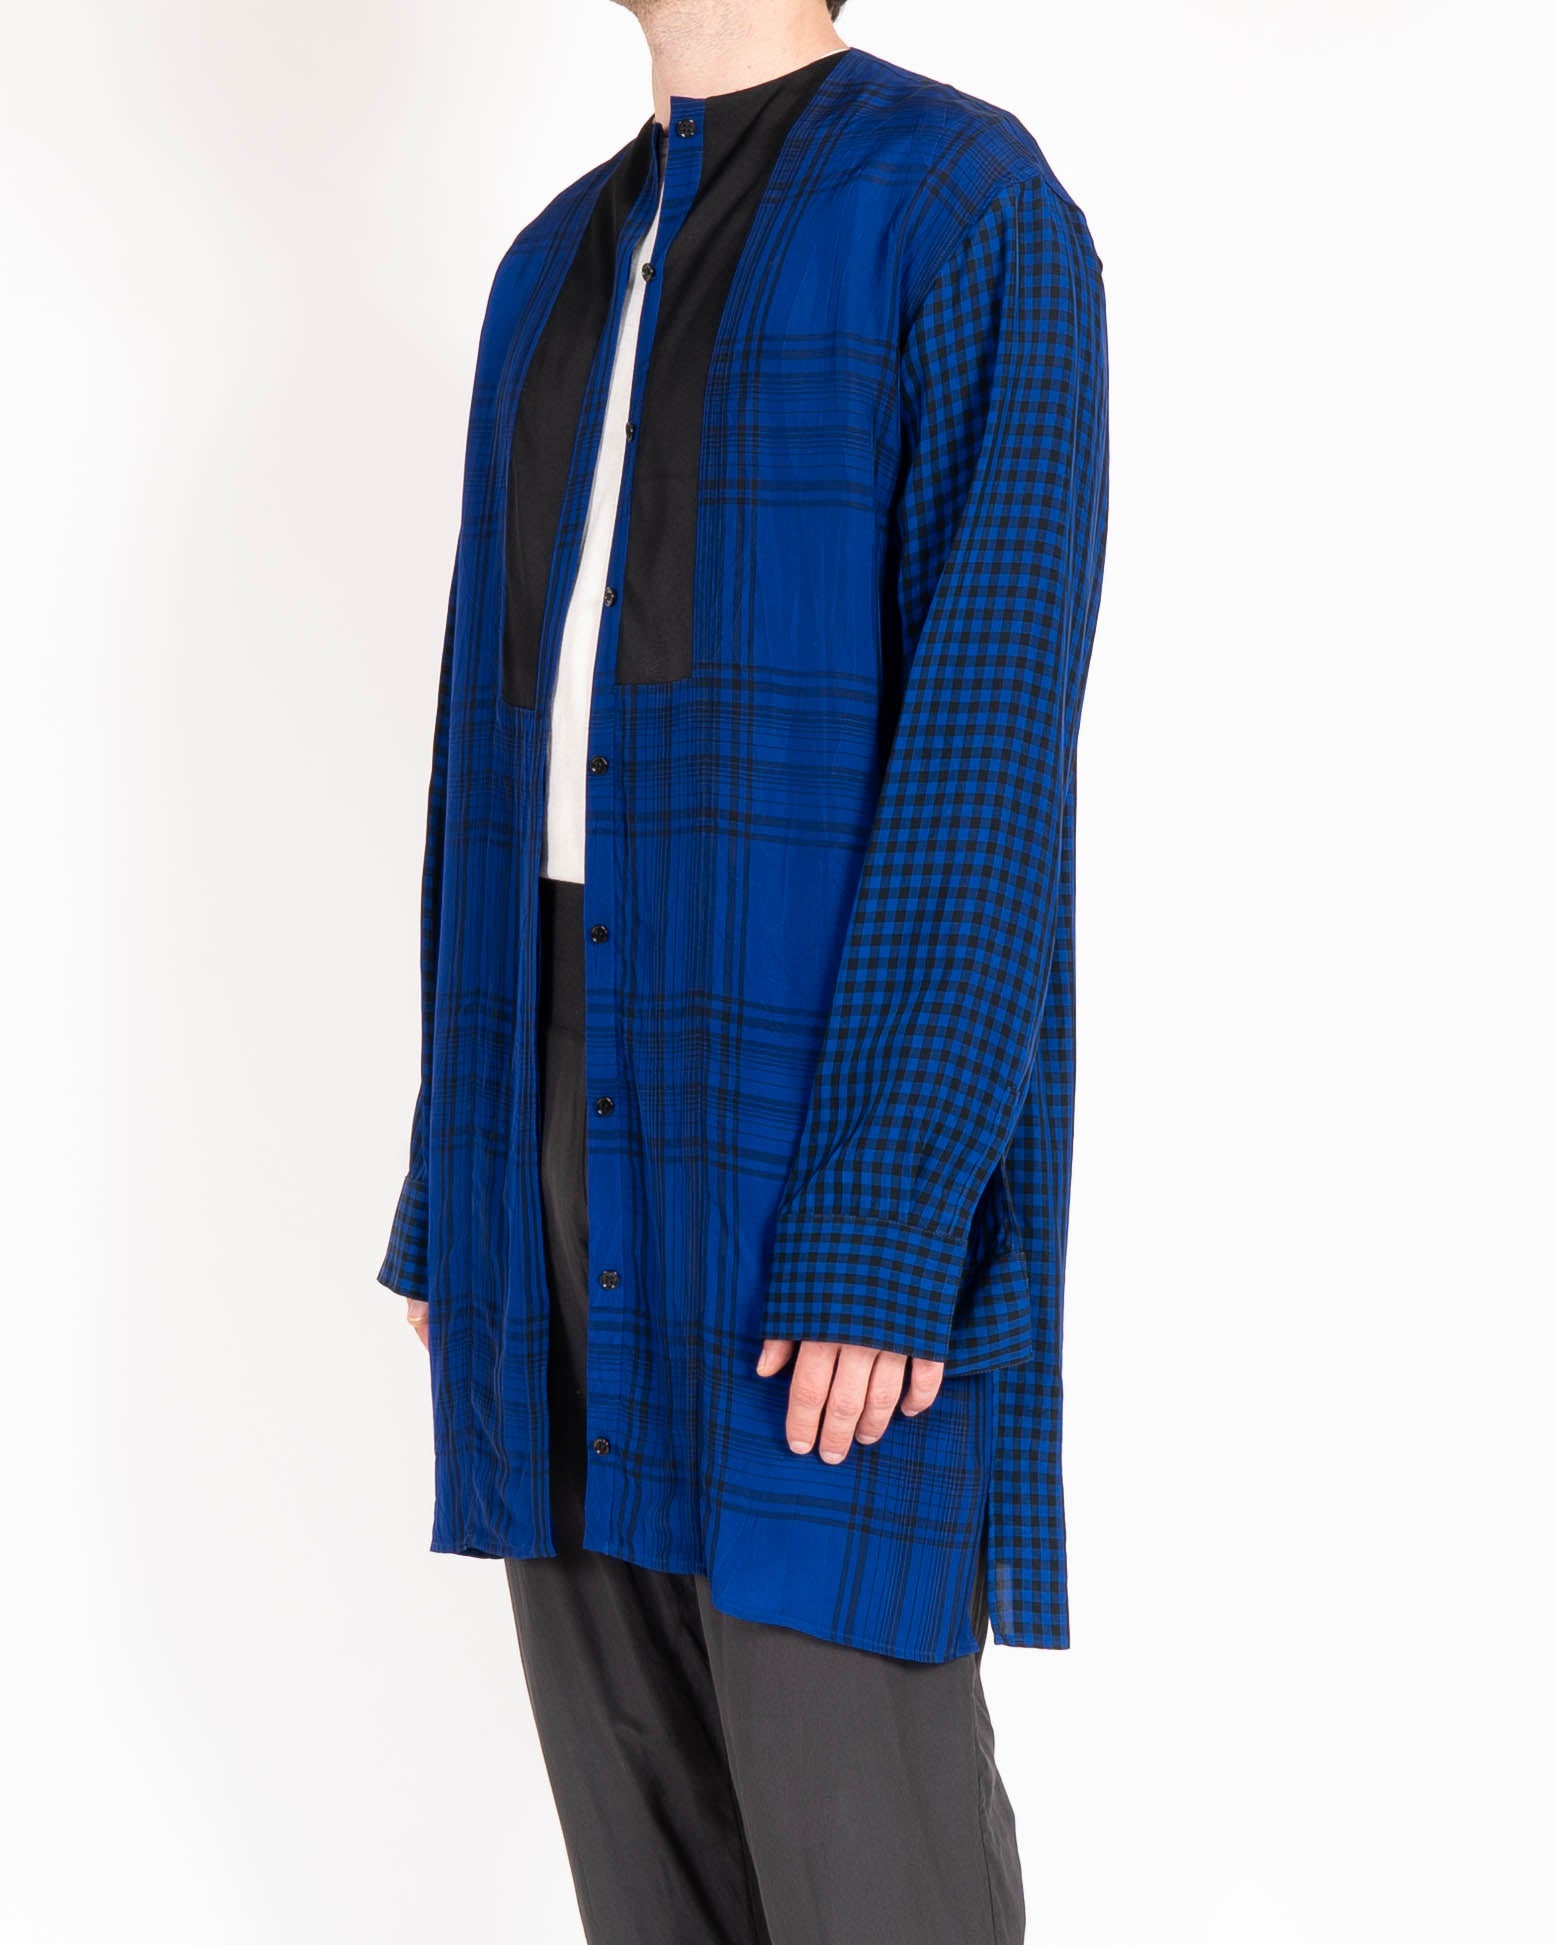 SS19 Long Tunic in blue checked Viscose big check